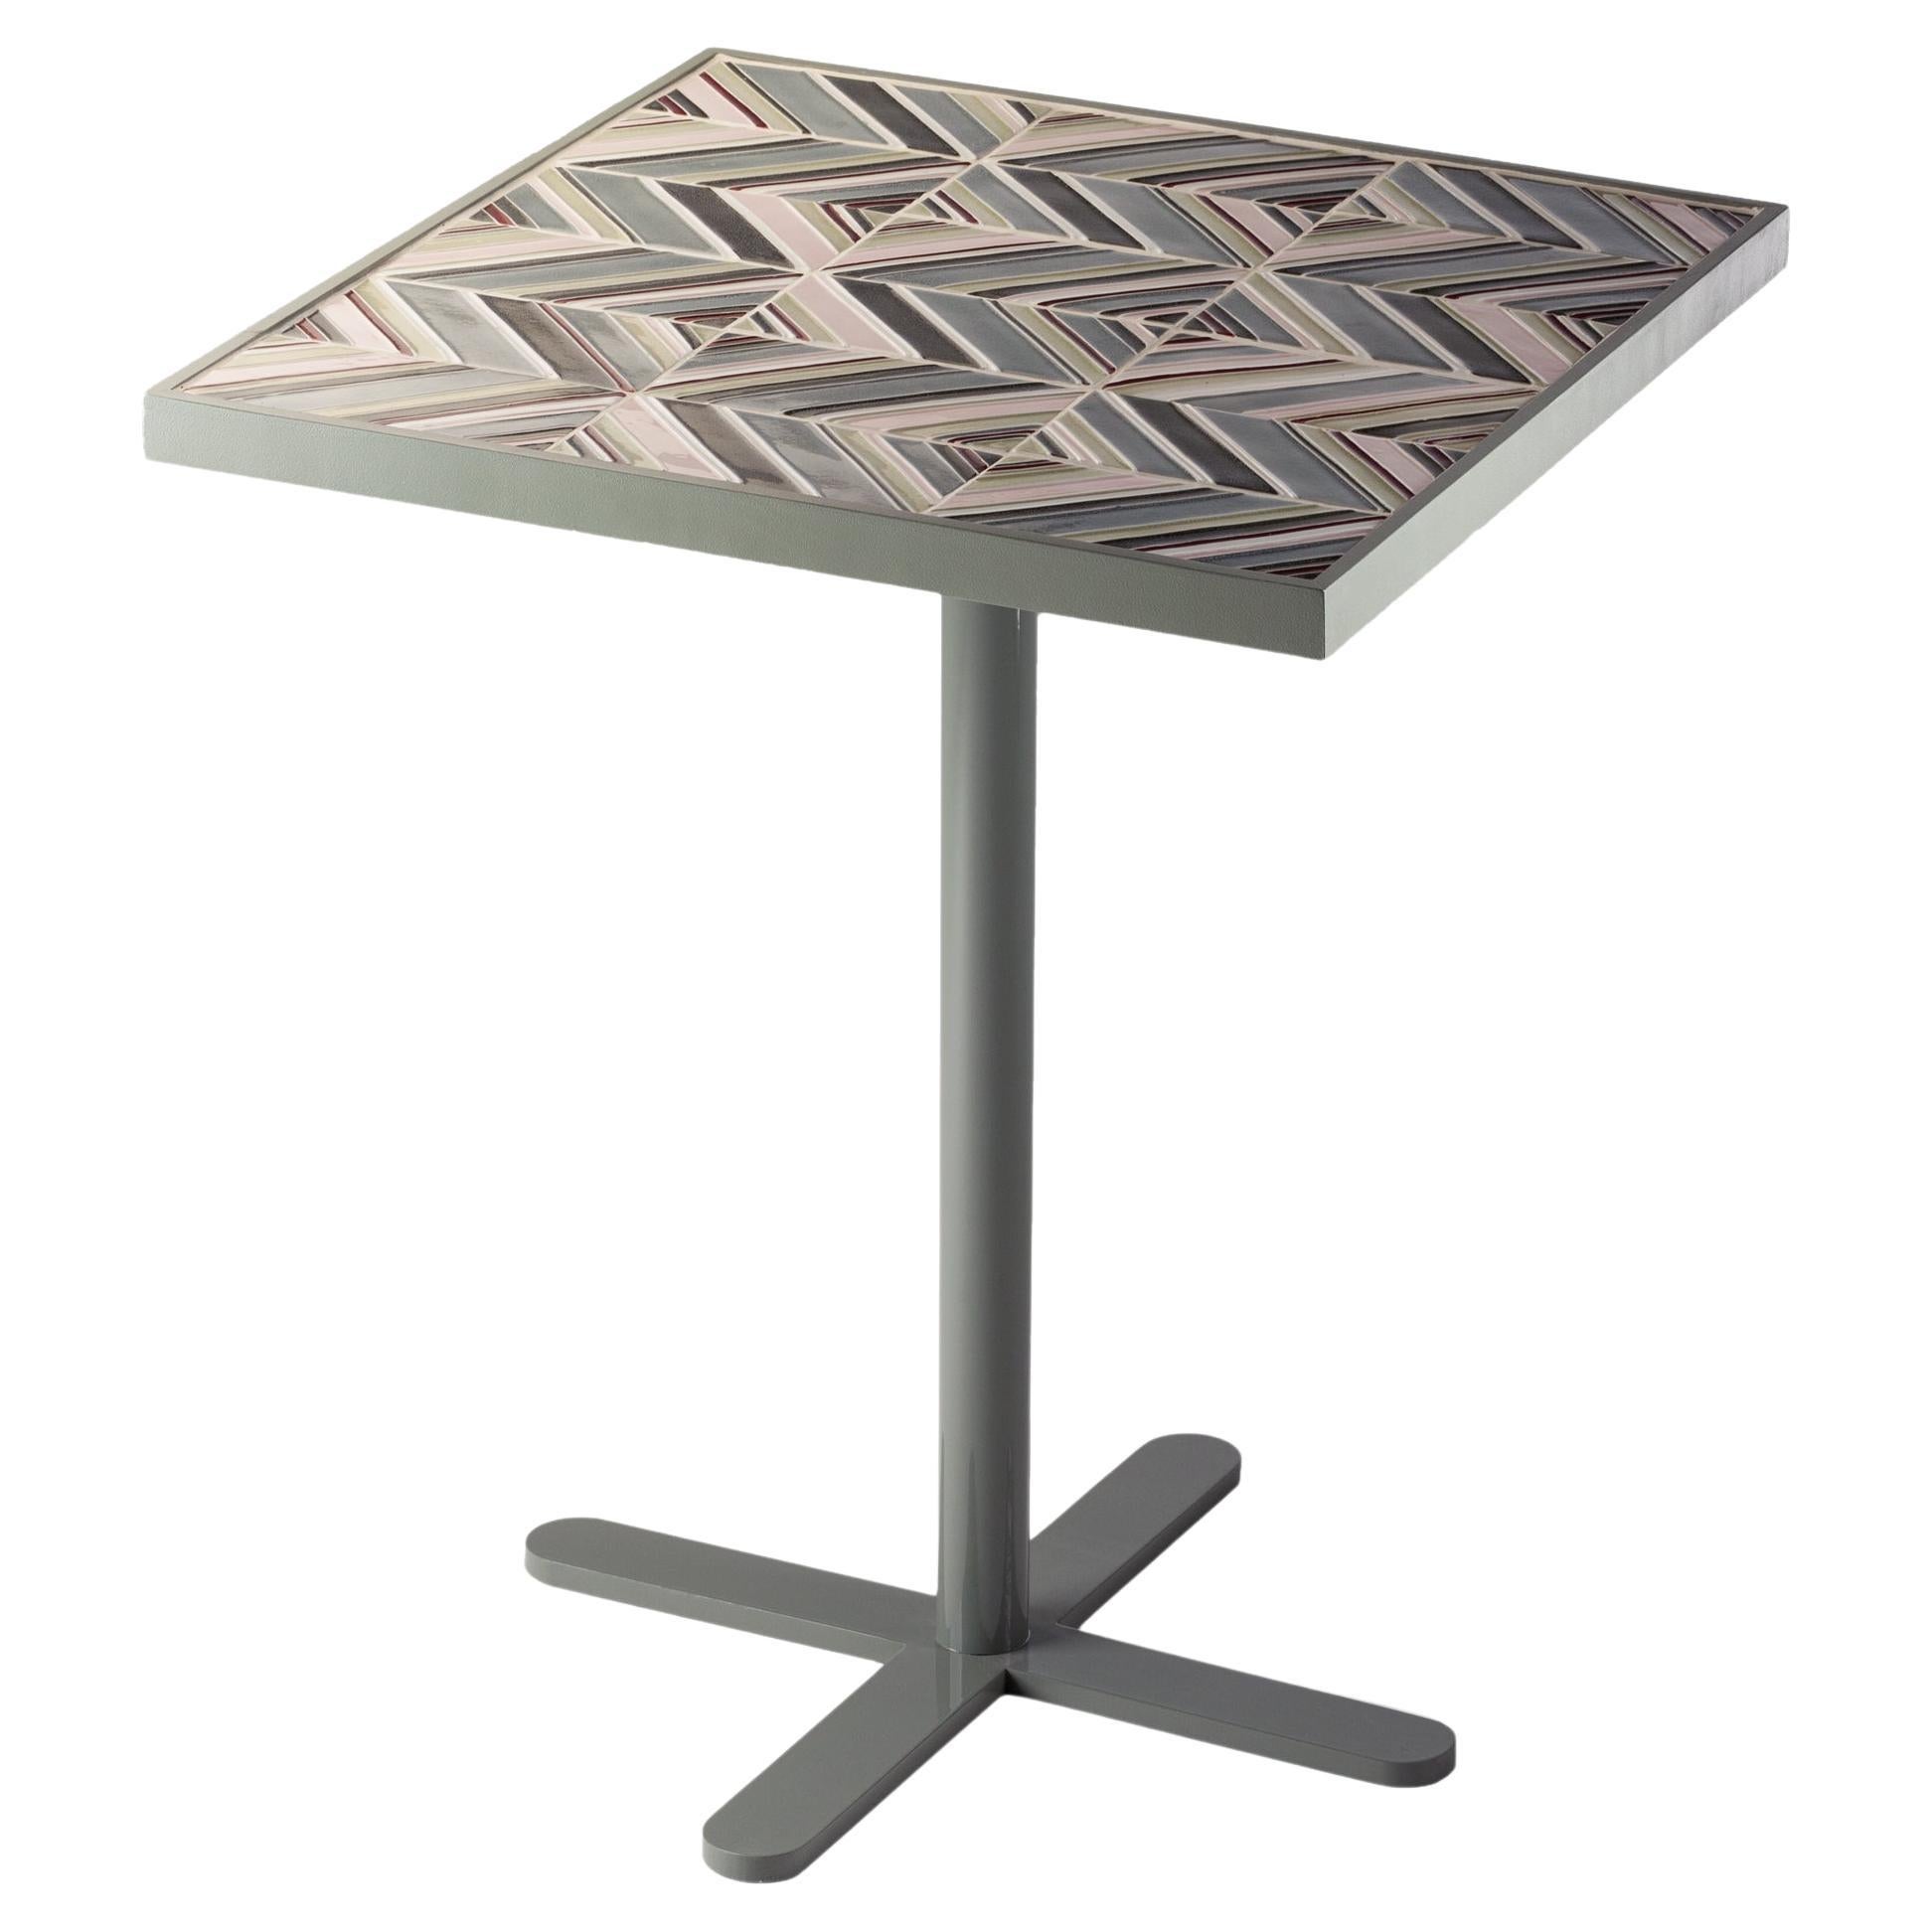 Dining Table Caldas Square with Botanical Garden Stripes Handmade Tiles For Sale